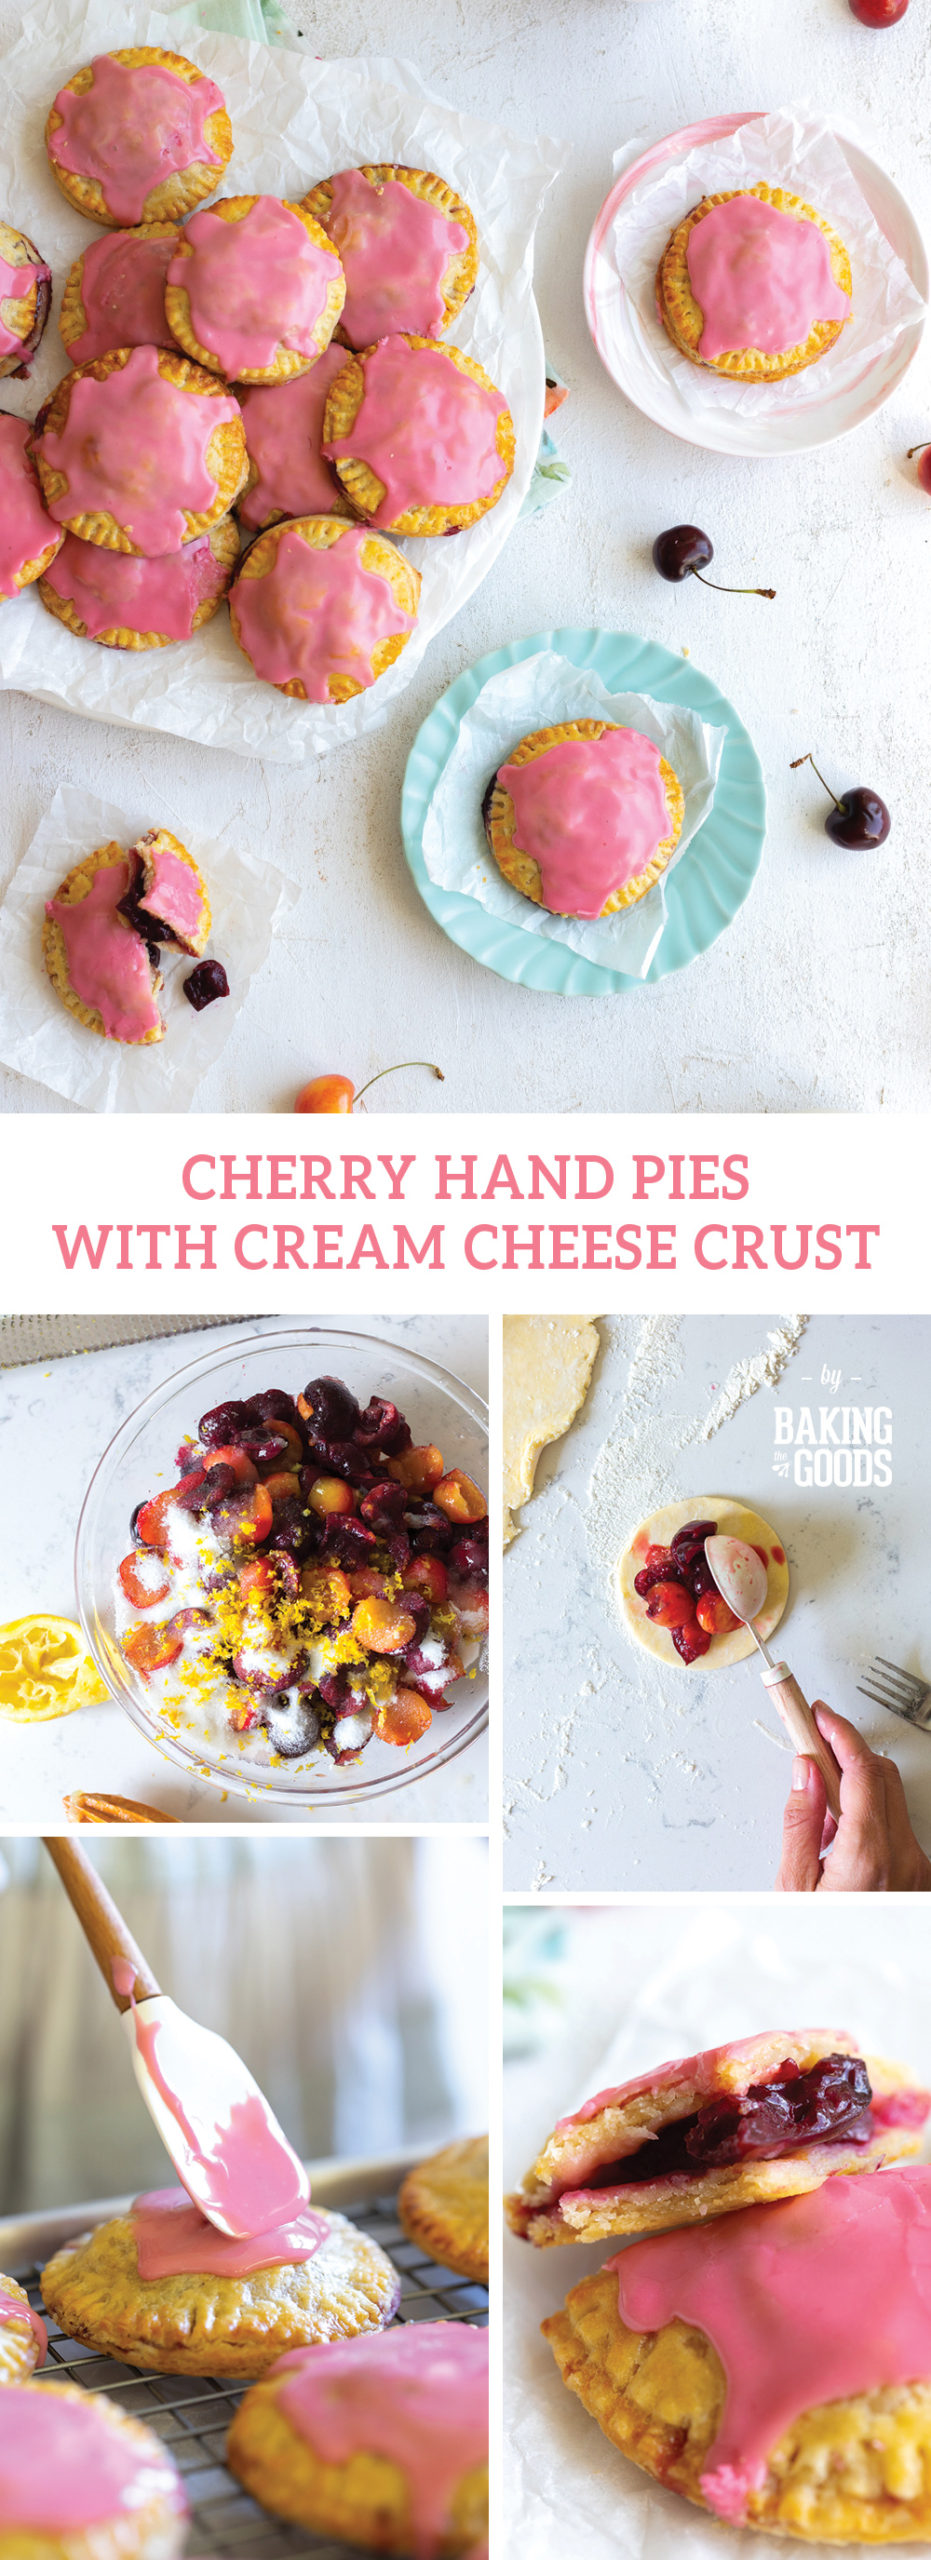 Cherry Hand Pies with Cream Cheese Crust by Baking The Goods